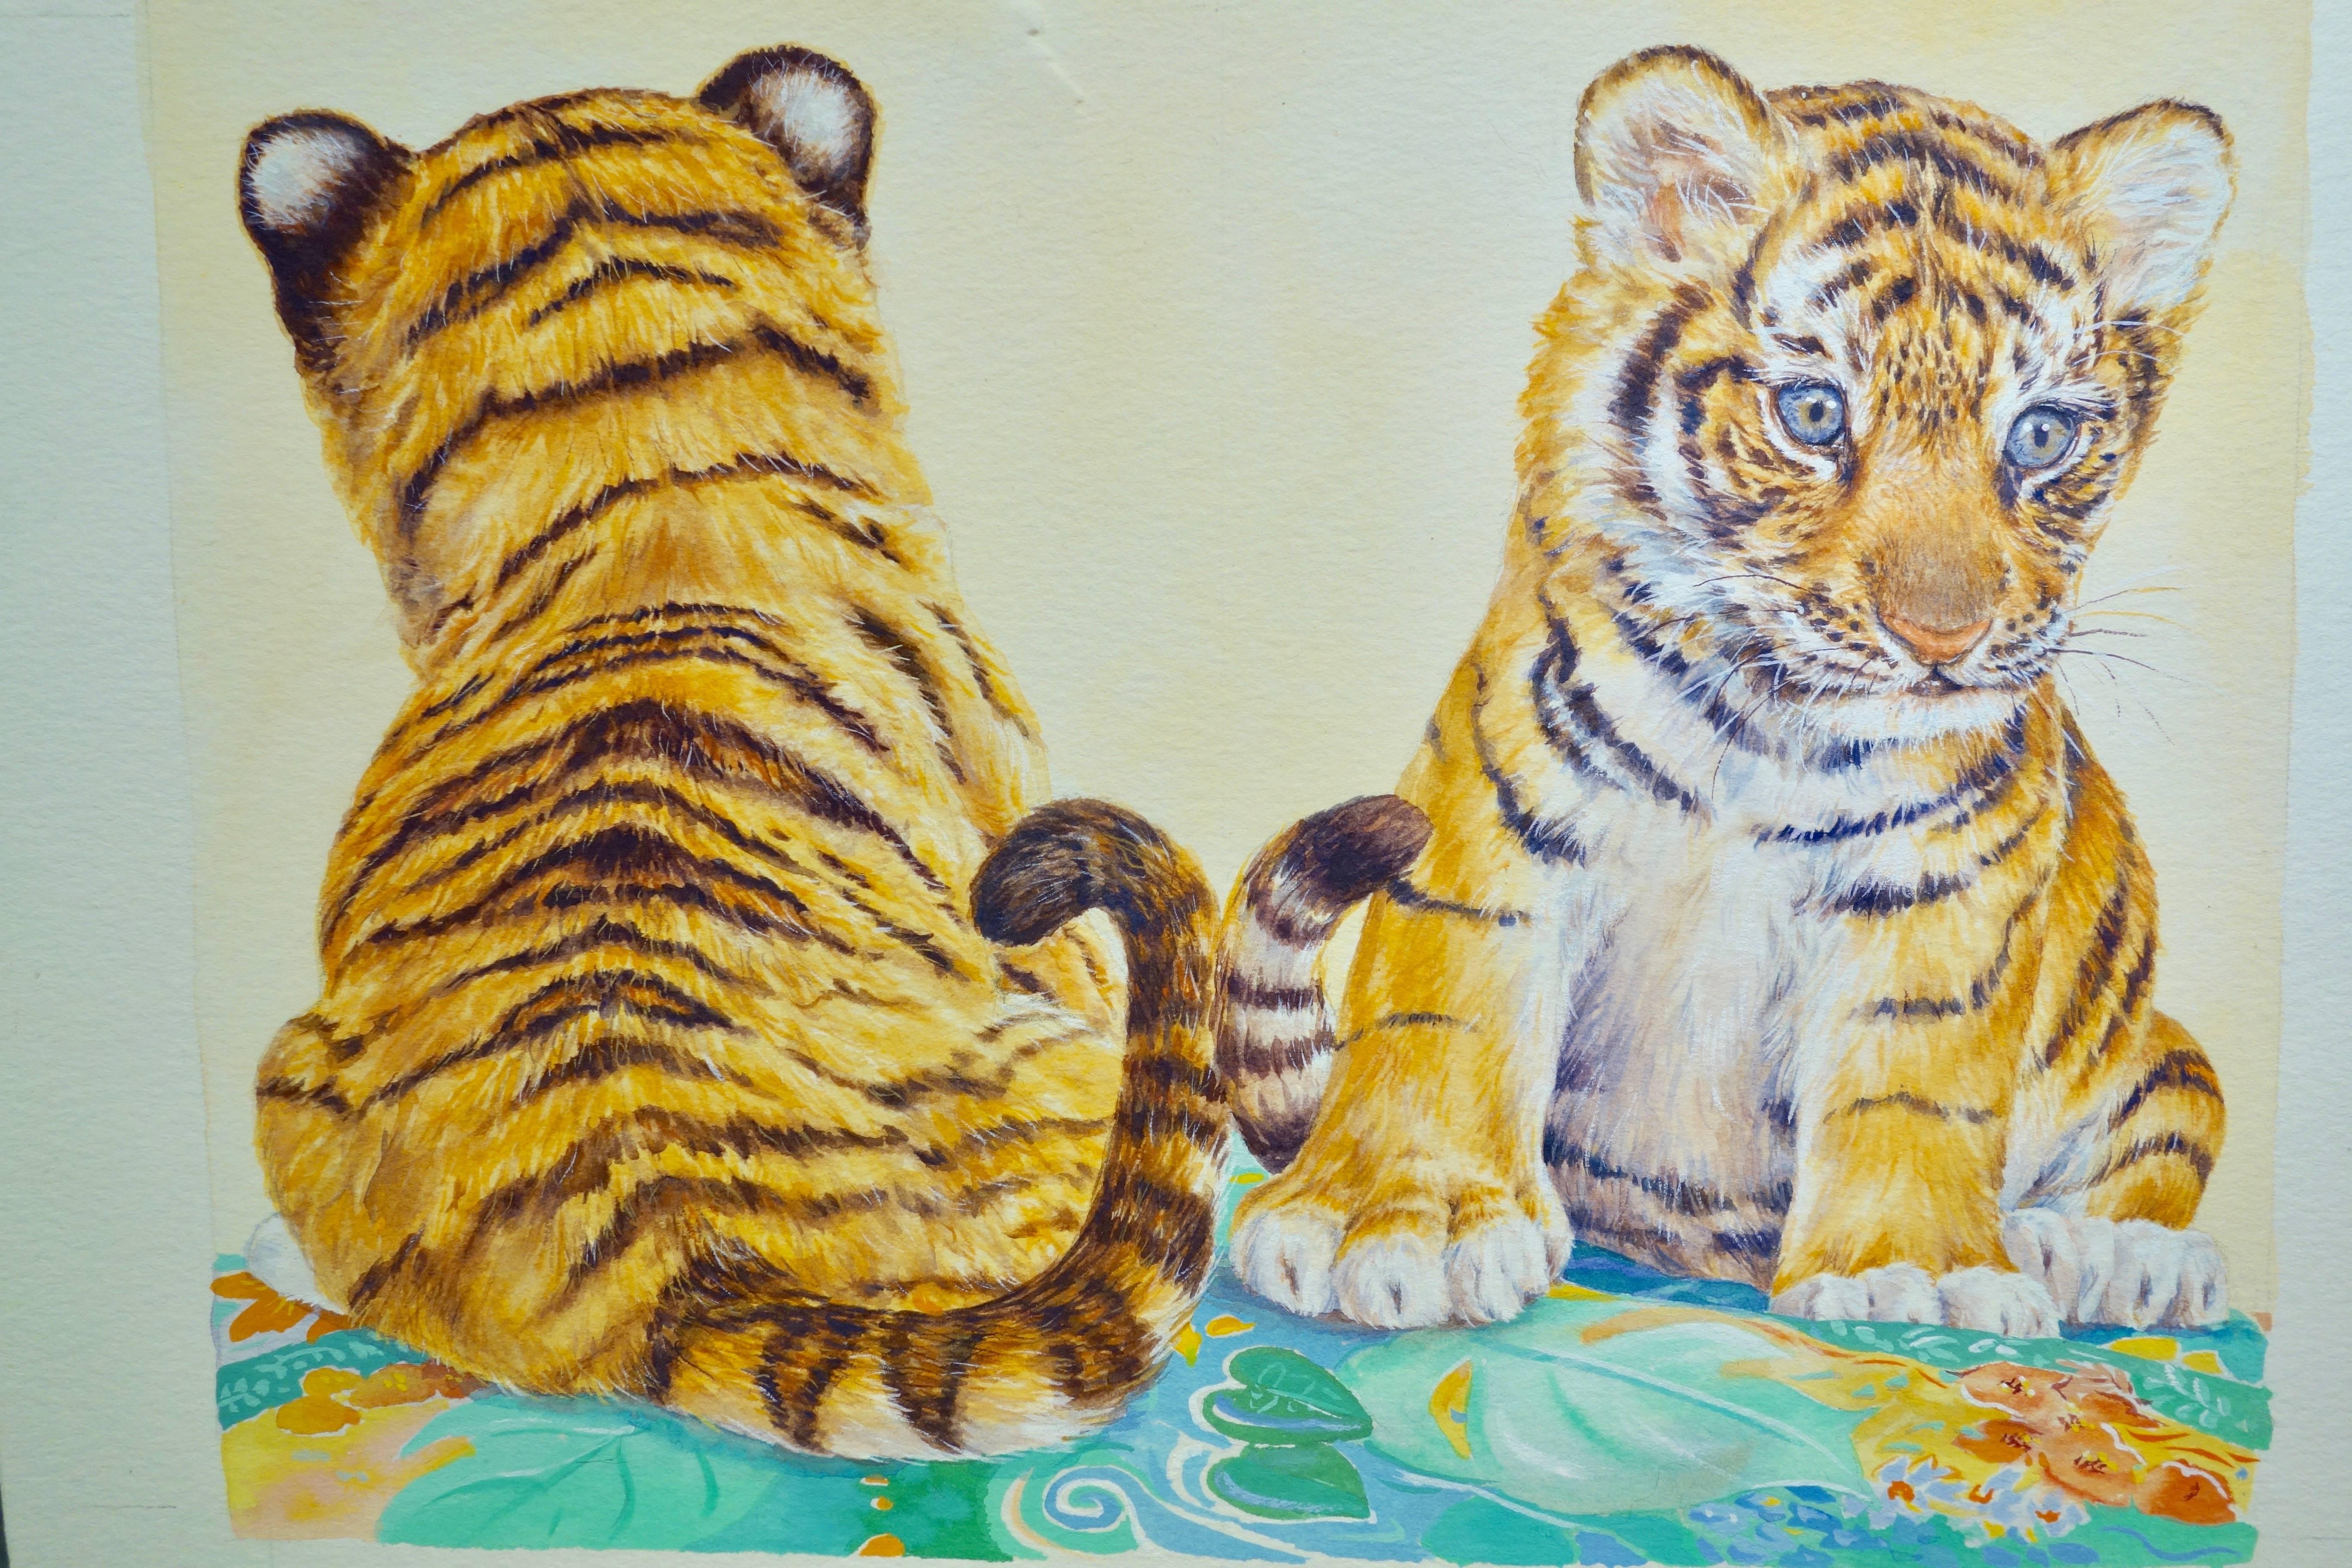 Debbie Allwright Animal Art - Two Tiger Cubs, seated on the ground.